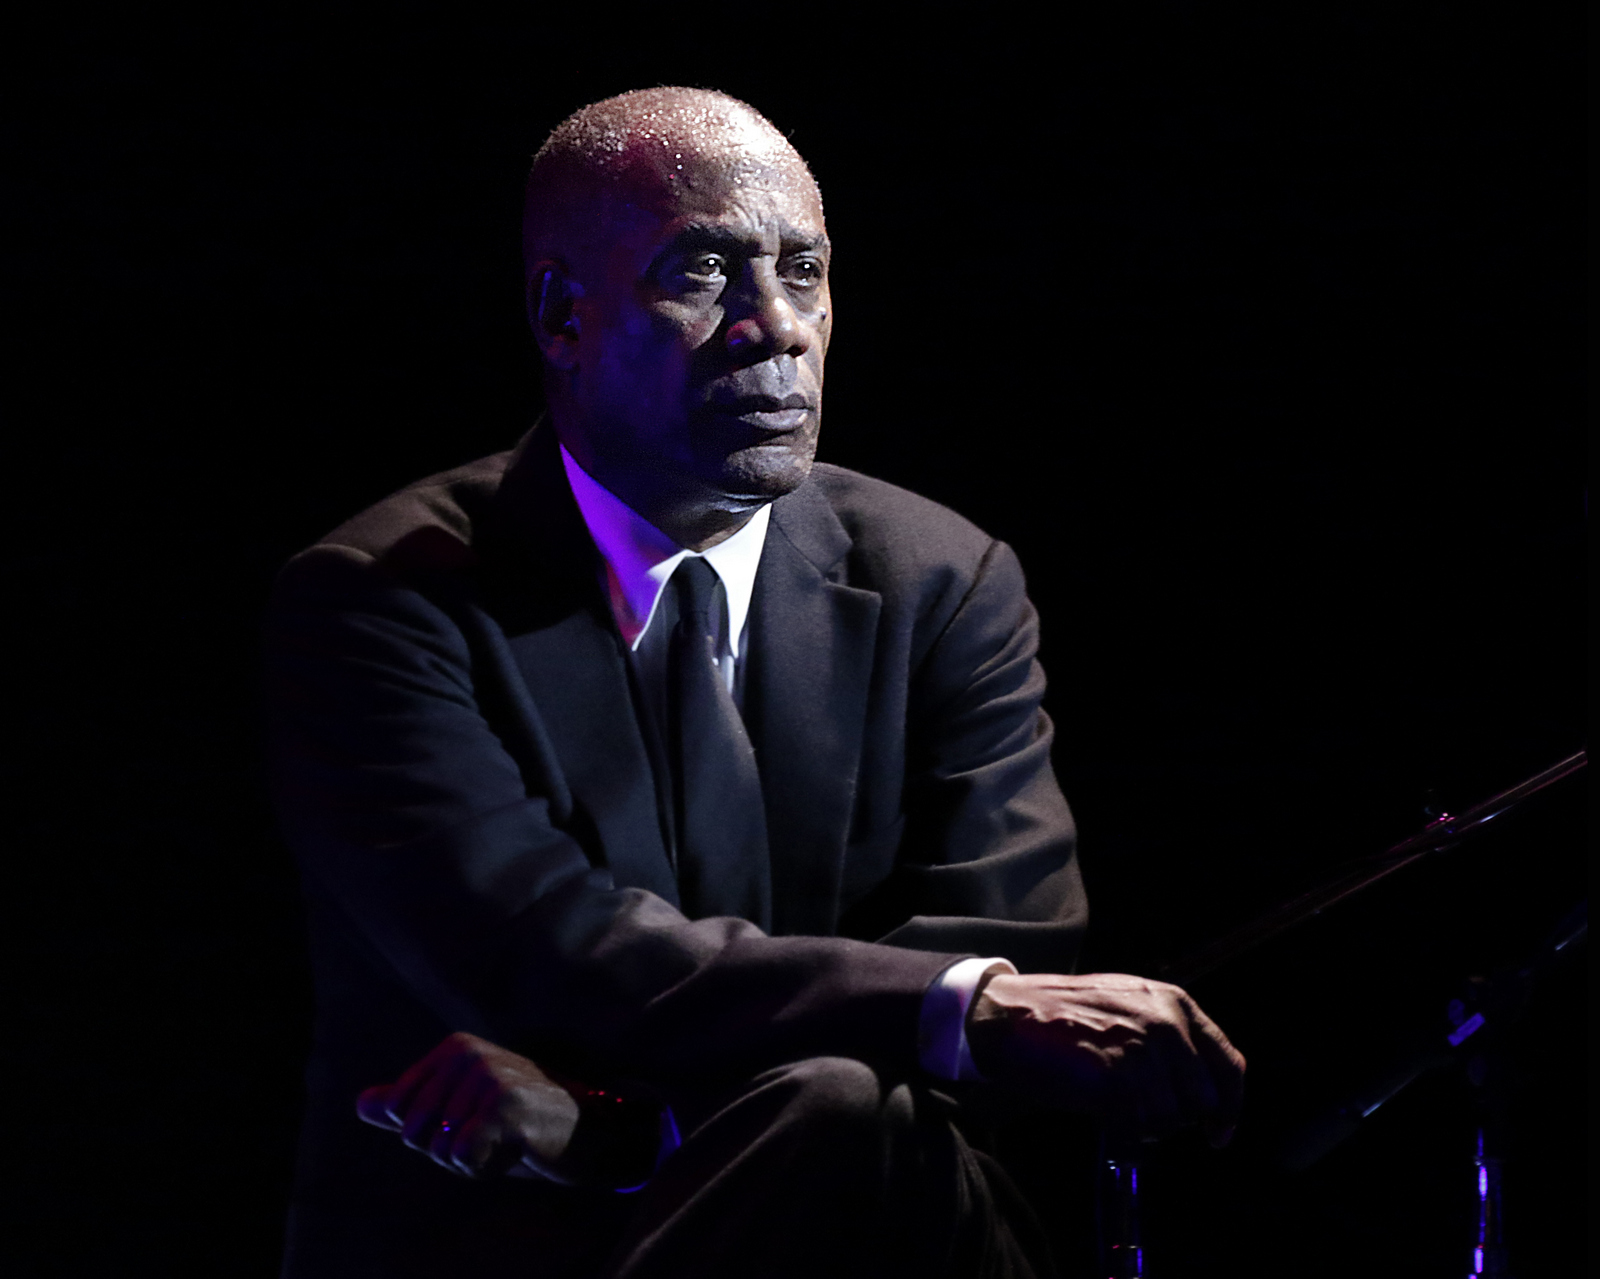 Turn Me Loose at the Wallis Annenberg Center for the Performing Arts. Pictured: Joe Morton as Dick Gregory. Photo credit: Lawrence K. Ho.